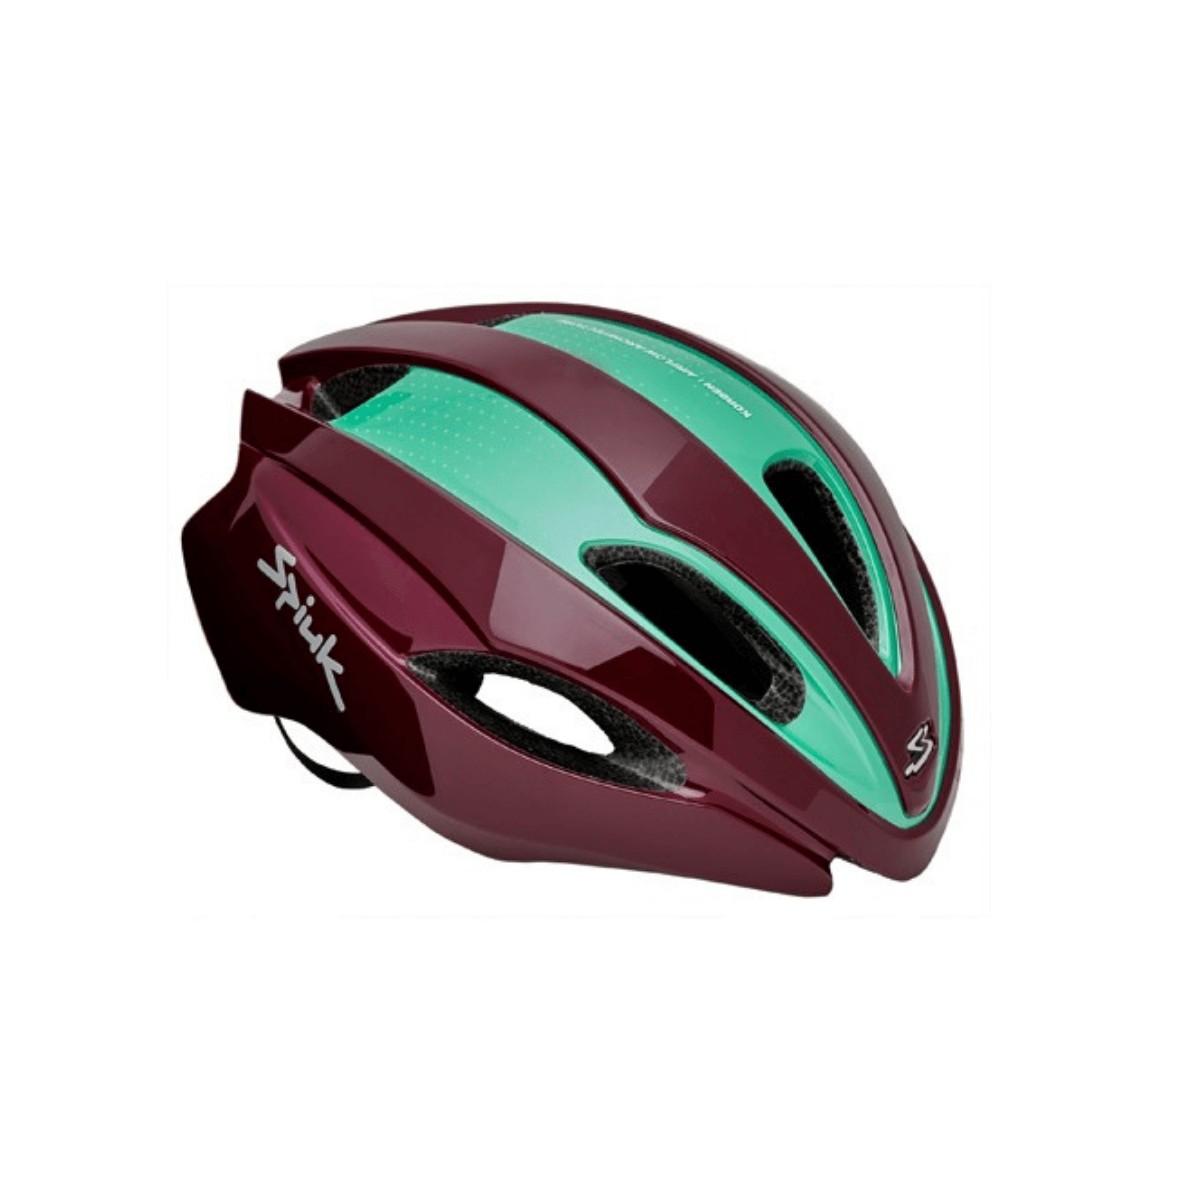 Casque Spiuk Korben Turquoise, Taille M/L (53-61 cm)